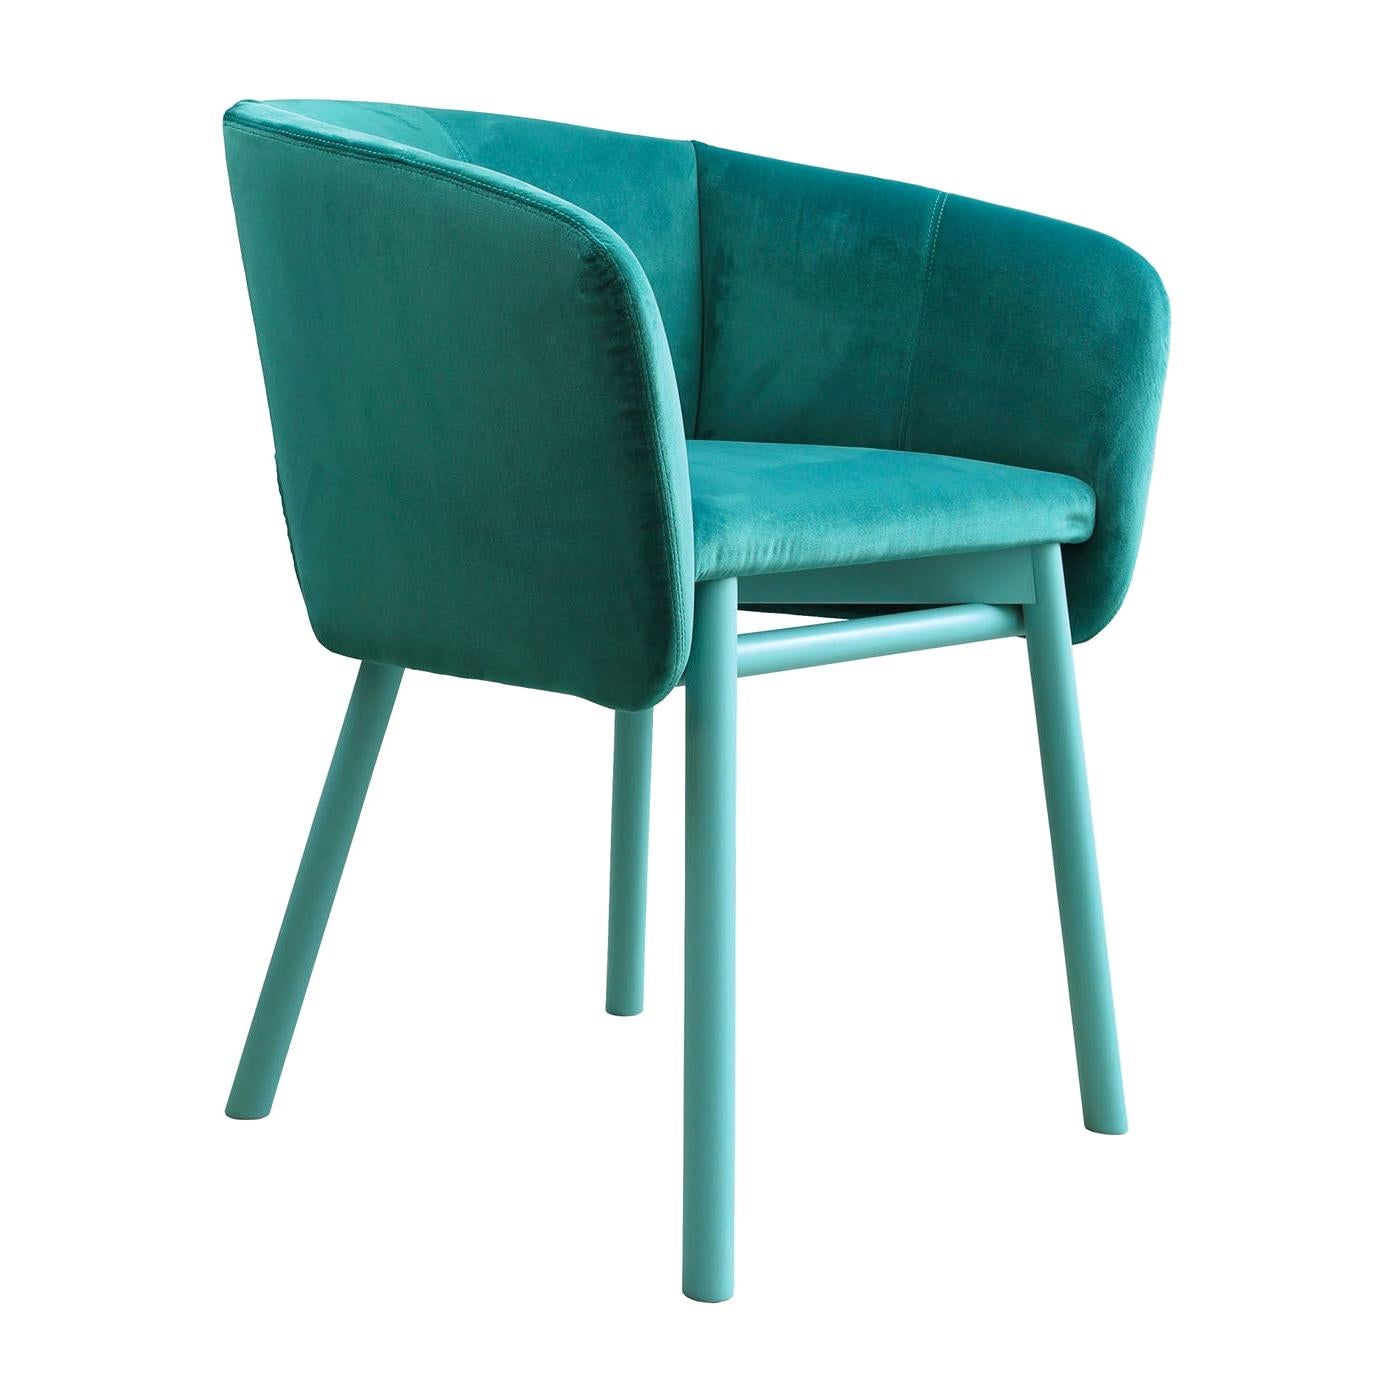 Balù Turquoise Chair by Emilio Nanni For Sale